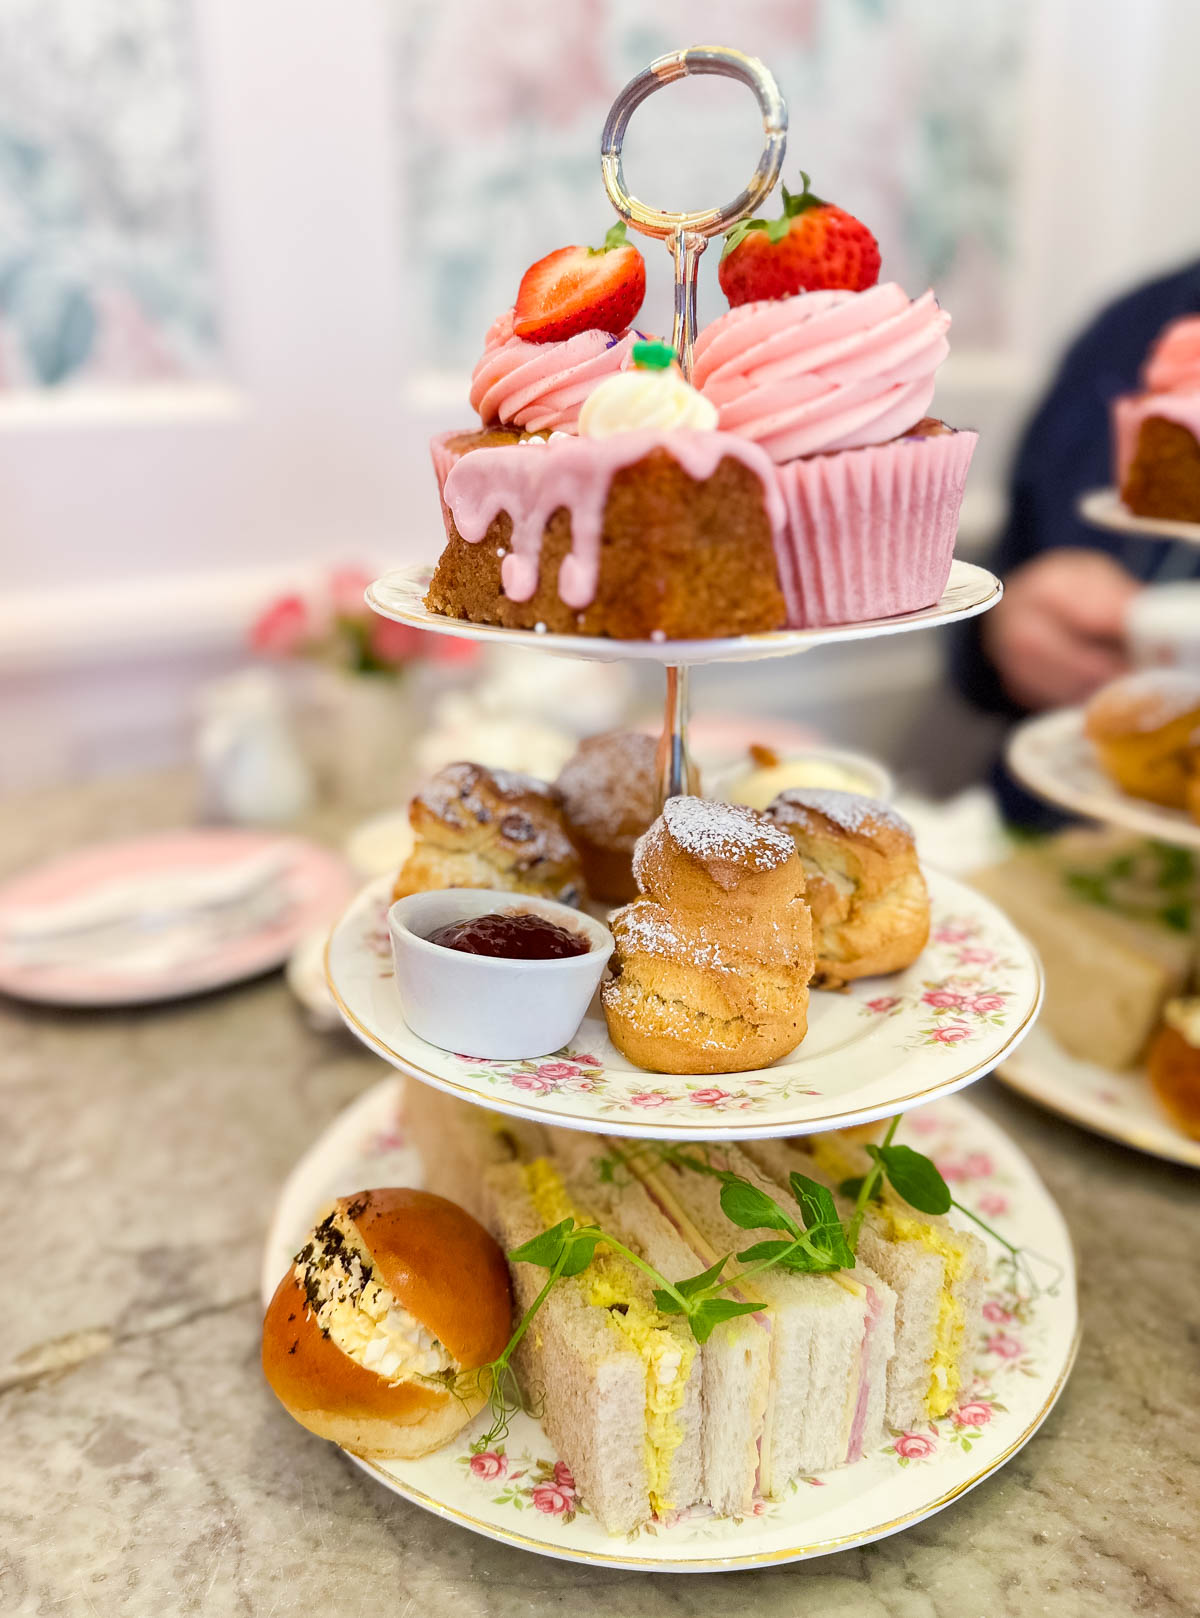 A 3-tier tray of tea time sandwiches and pastries at a tea shop in London.